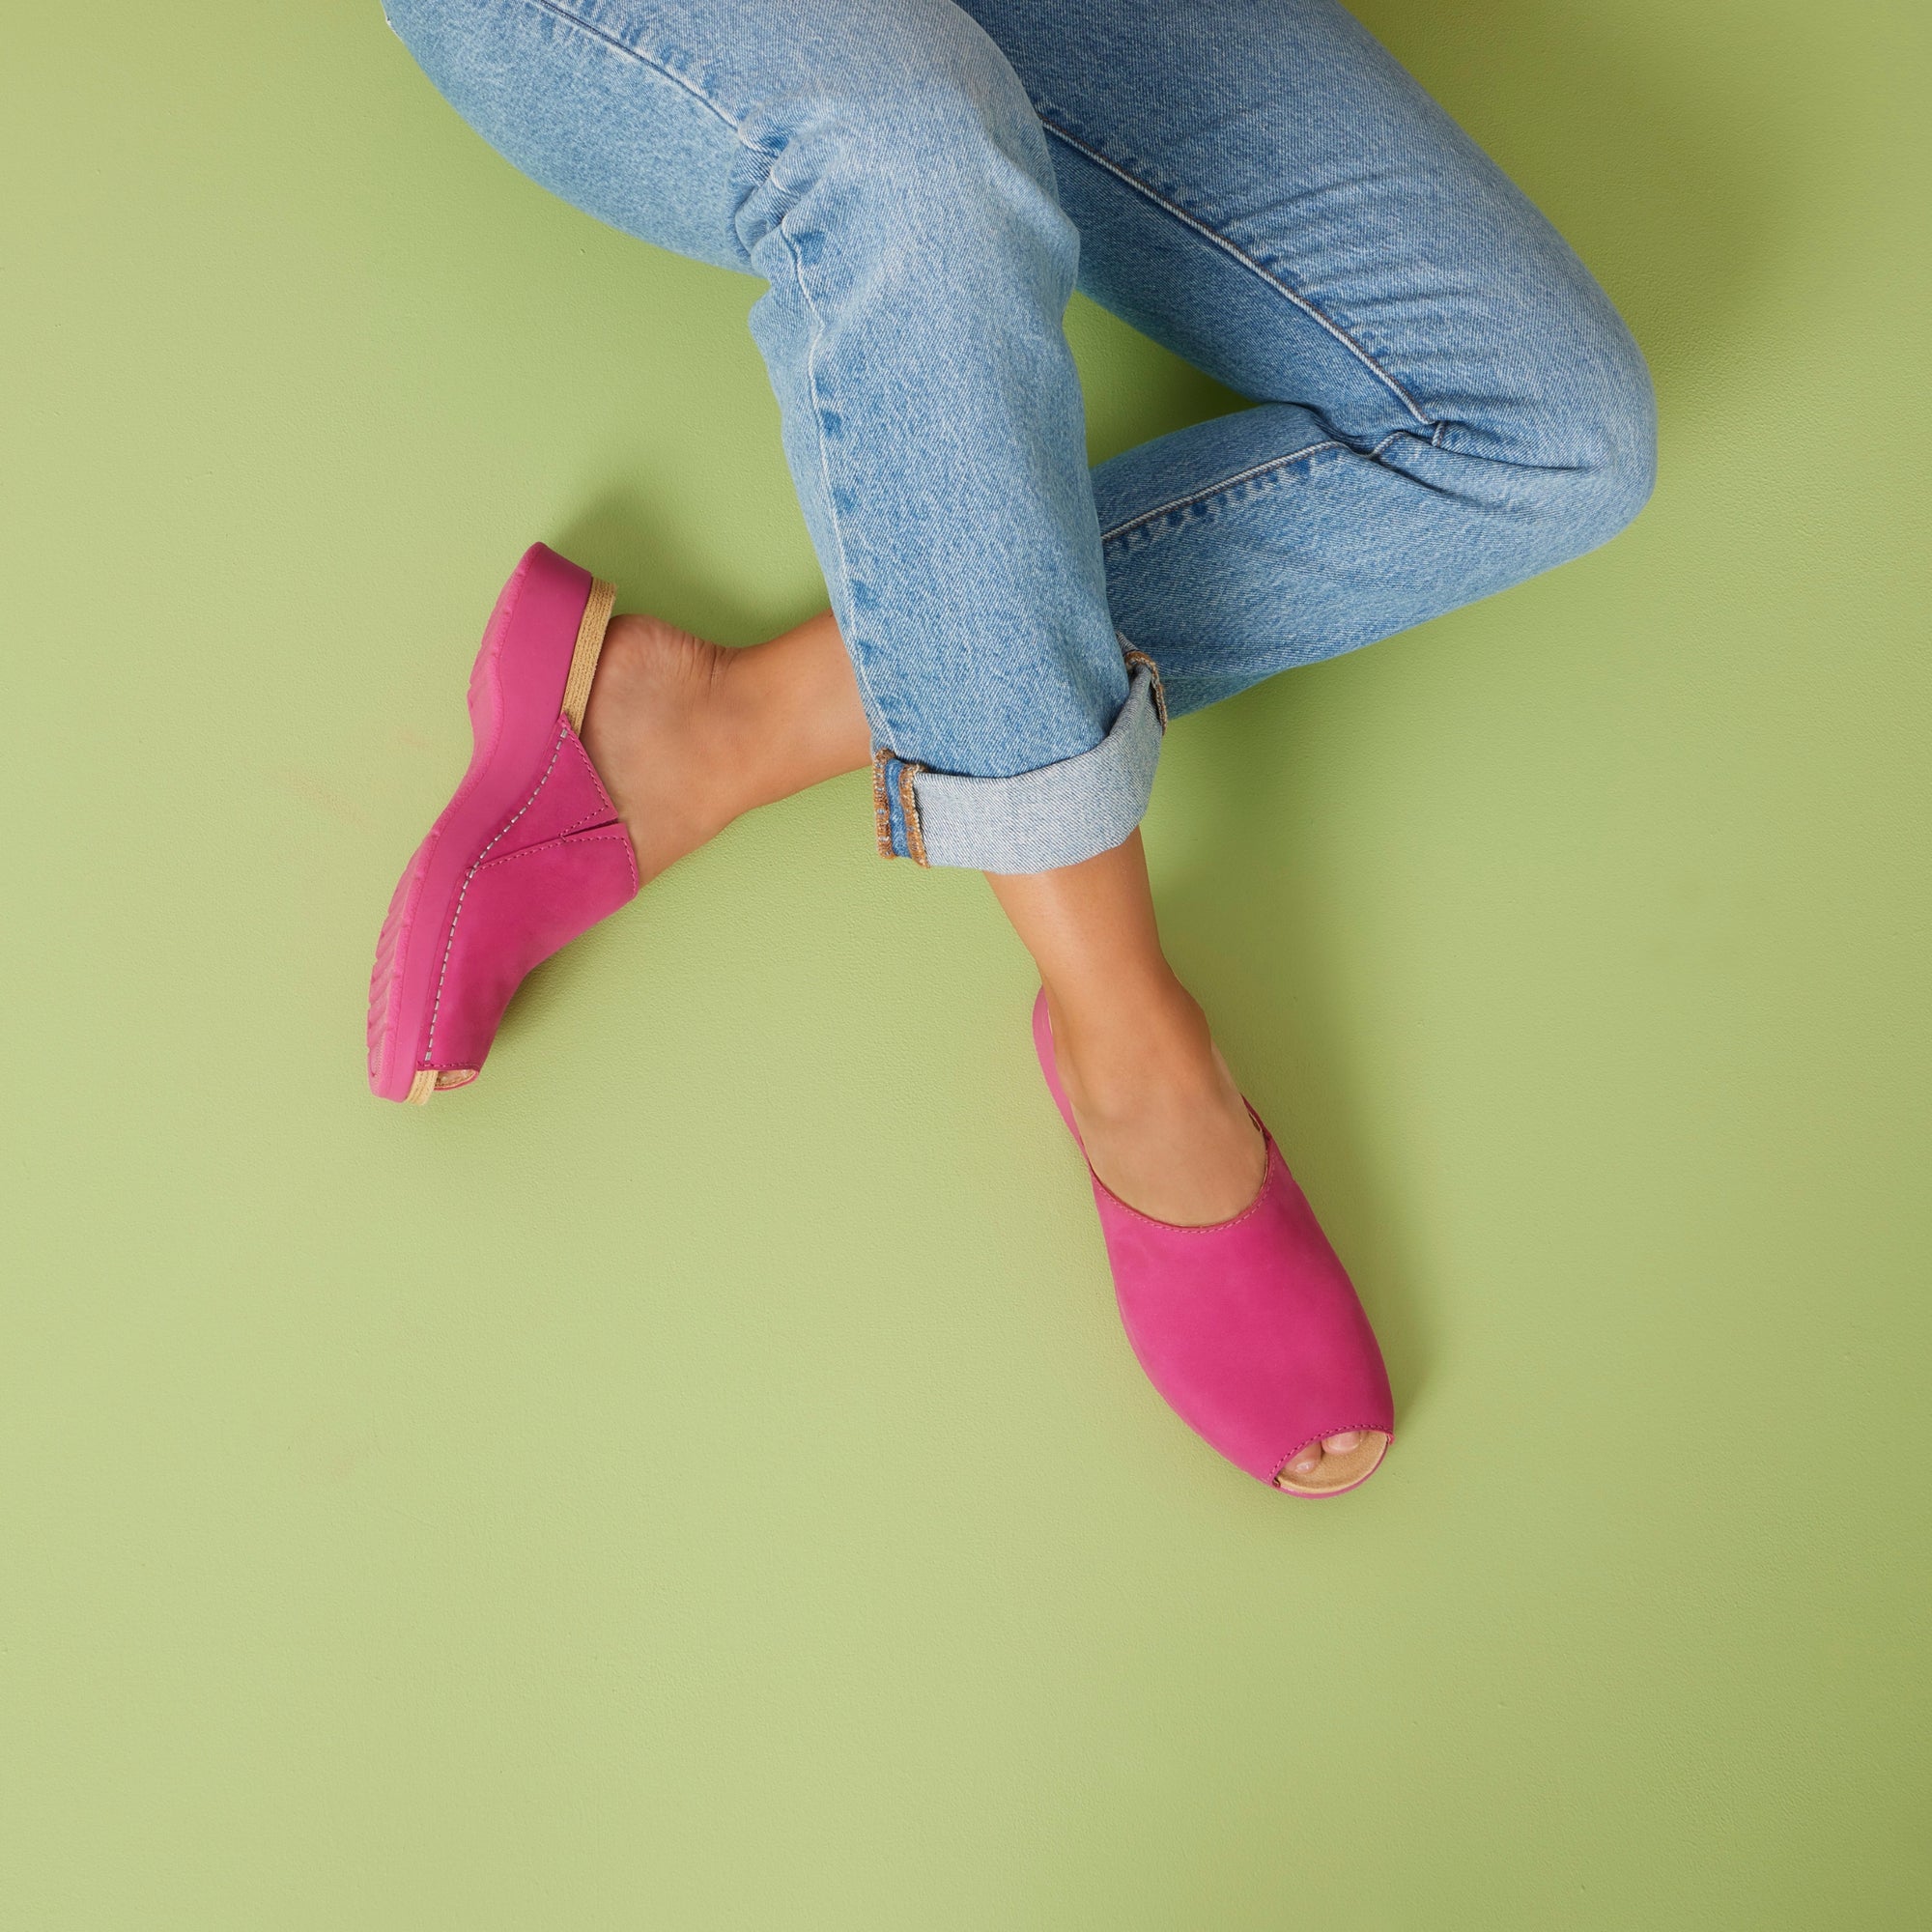 Fuchsia slide sandals shown on a subtle green background to show the pop of color.